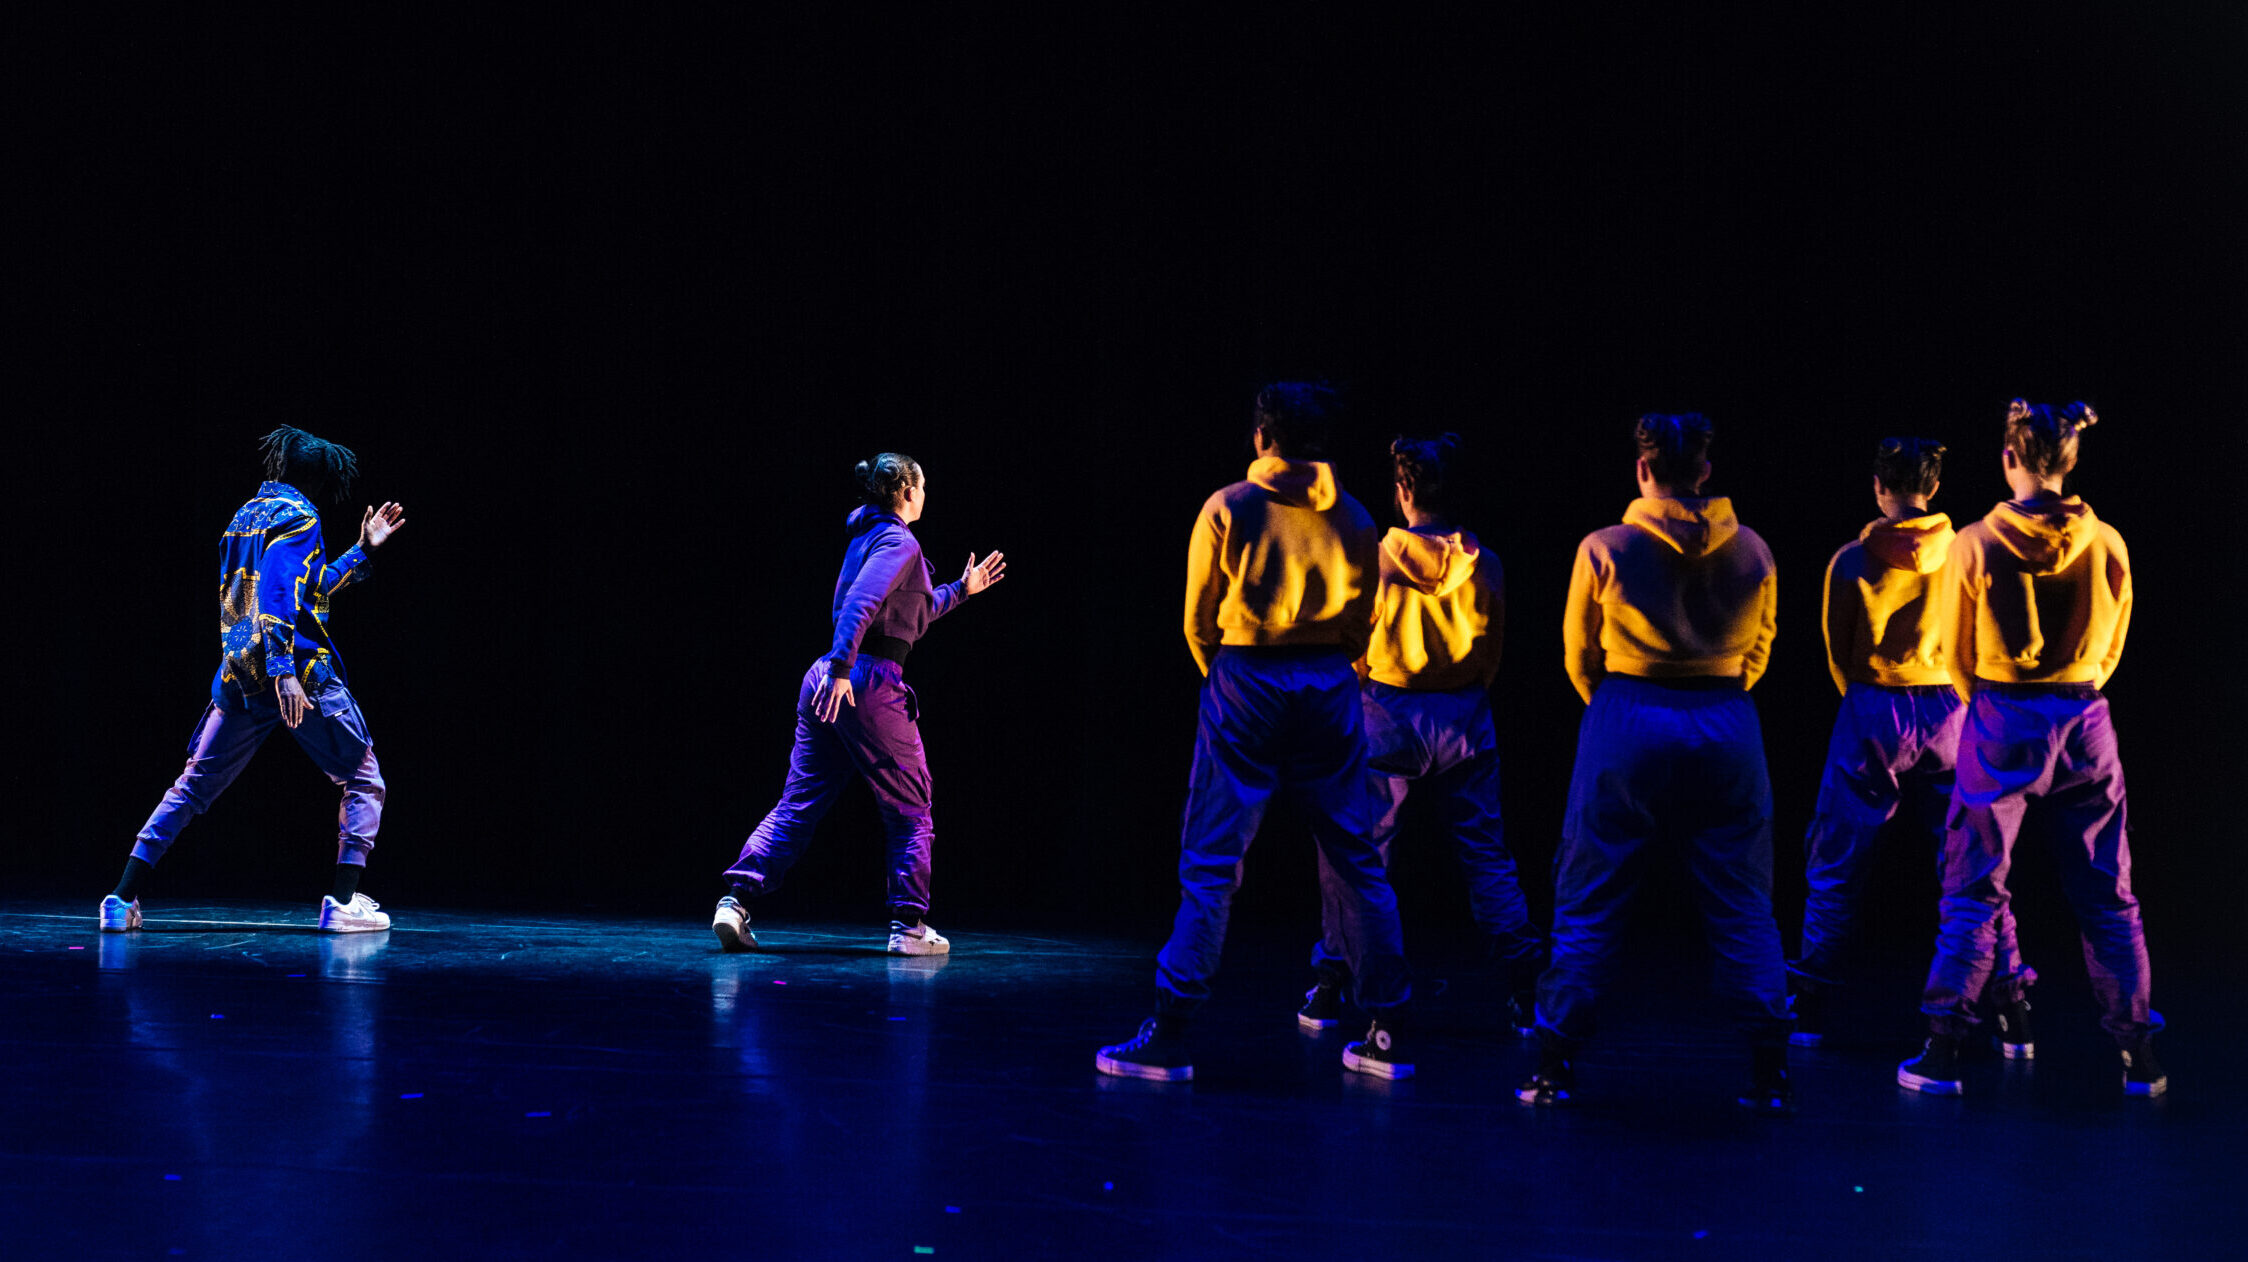 A group of dancers perform on stage together.